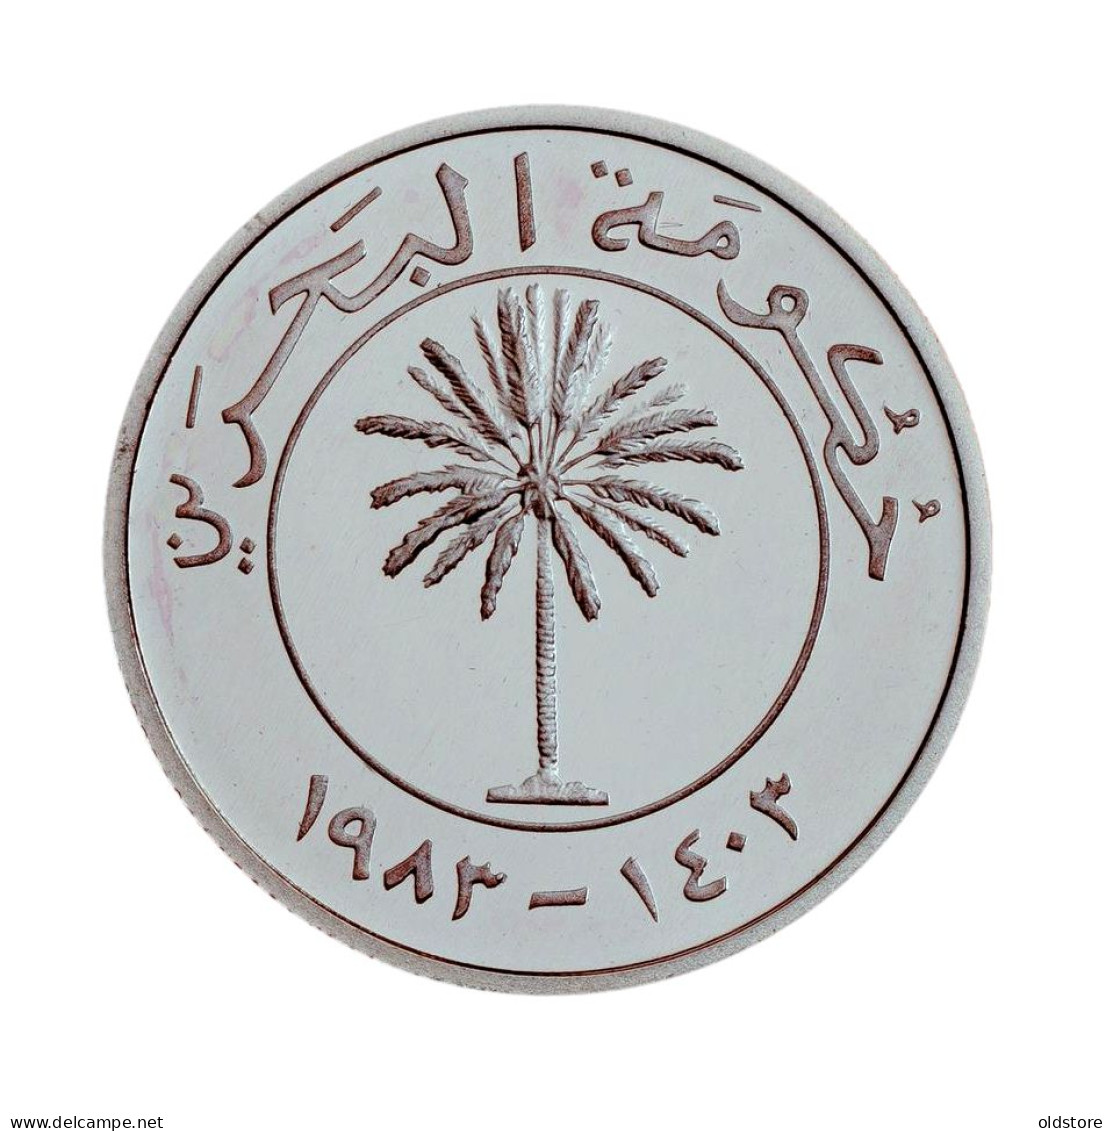 Bahrain Coins - MINT (25 Fils ) Proof  -  Sterling Silver - ND 1983 - Mint Silver Coins - Bahrein